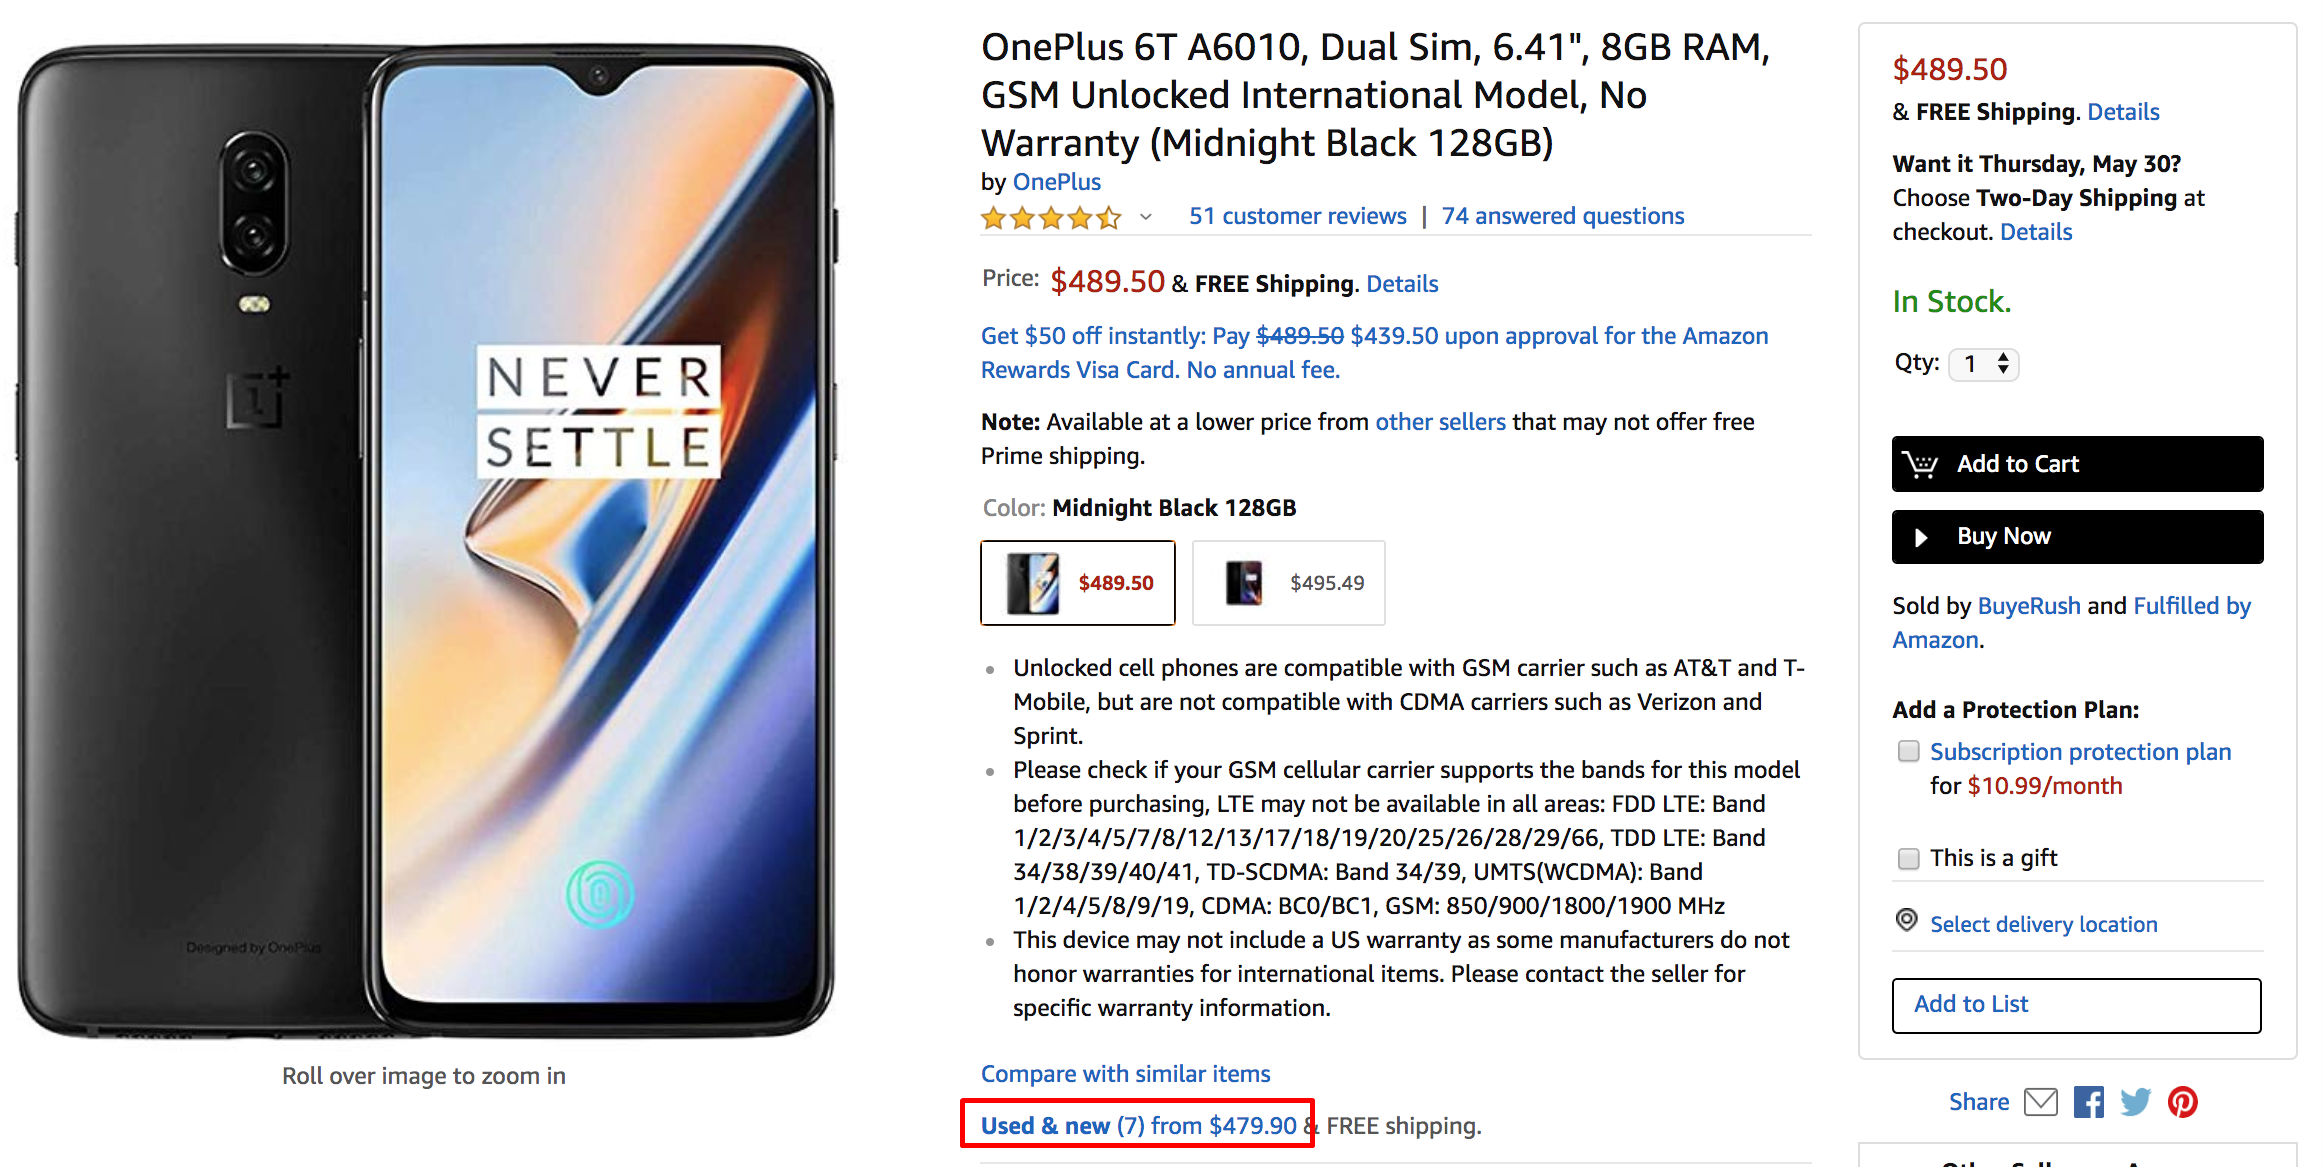 An example Product Landing Page on Amazon.com showing Offer Summaries (Highlighted)